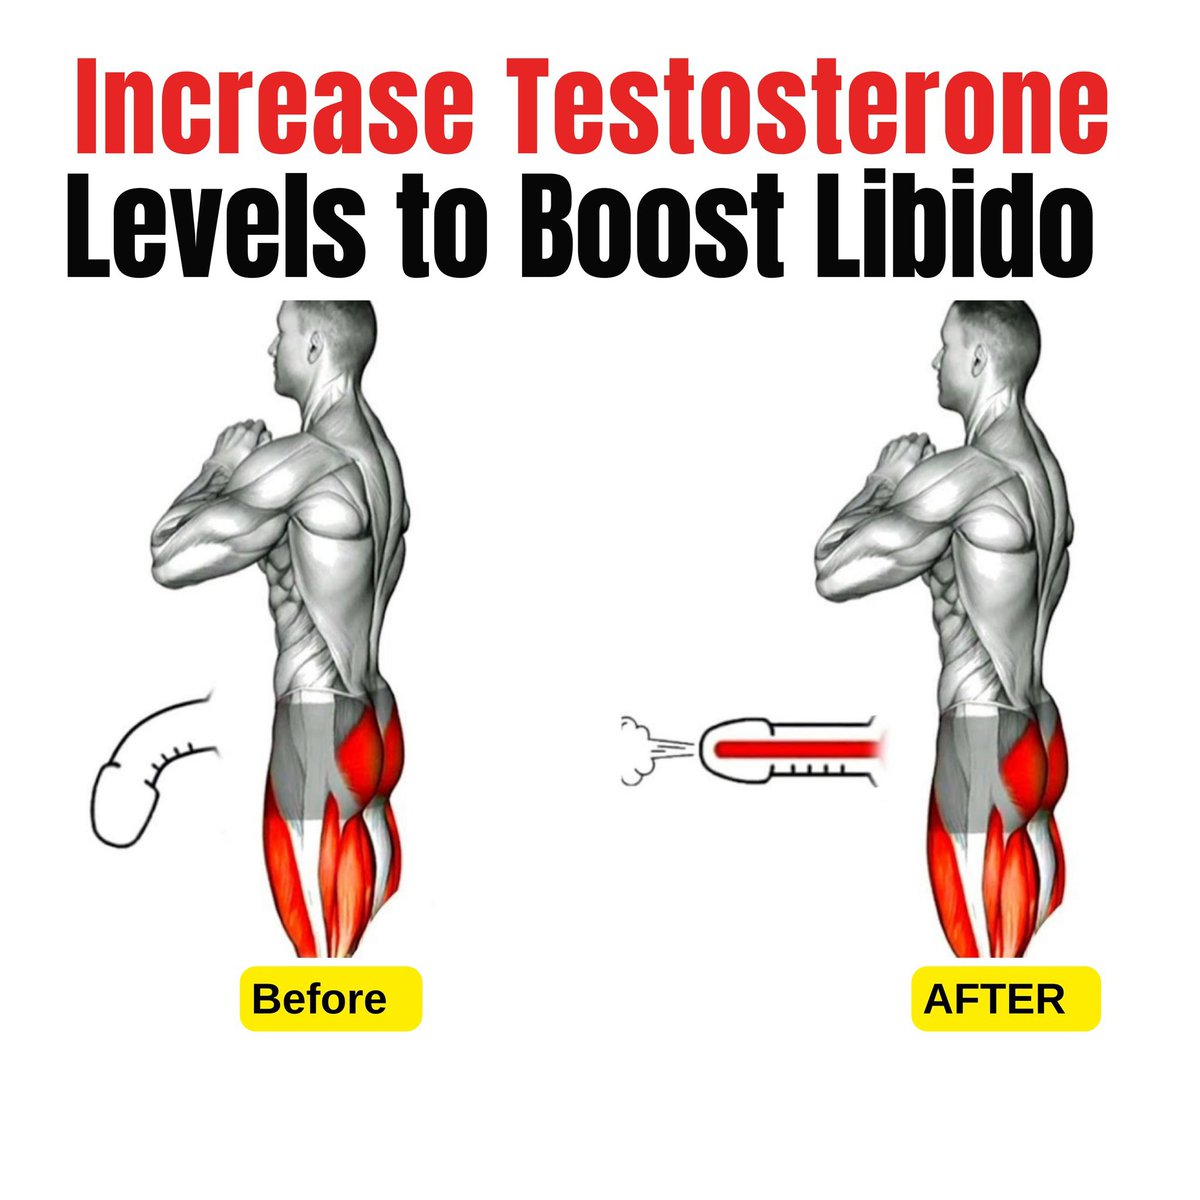 Make your partner smile again, Increase your testosterone, boost your libido

(watch this kegel exercises) 👇